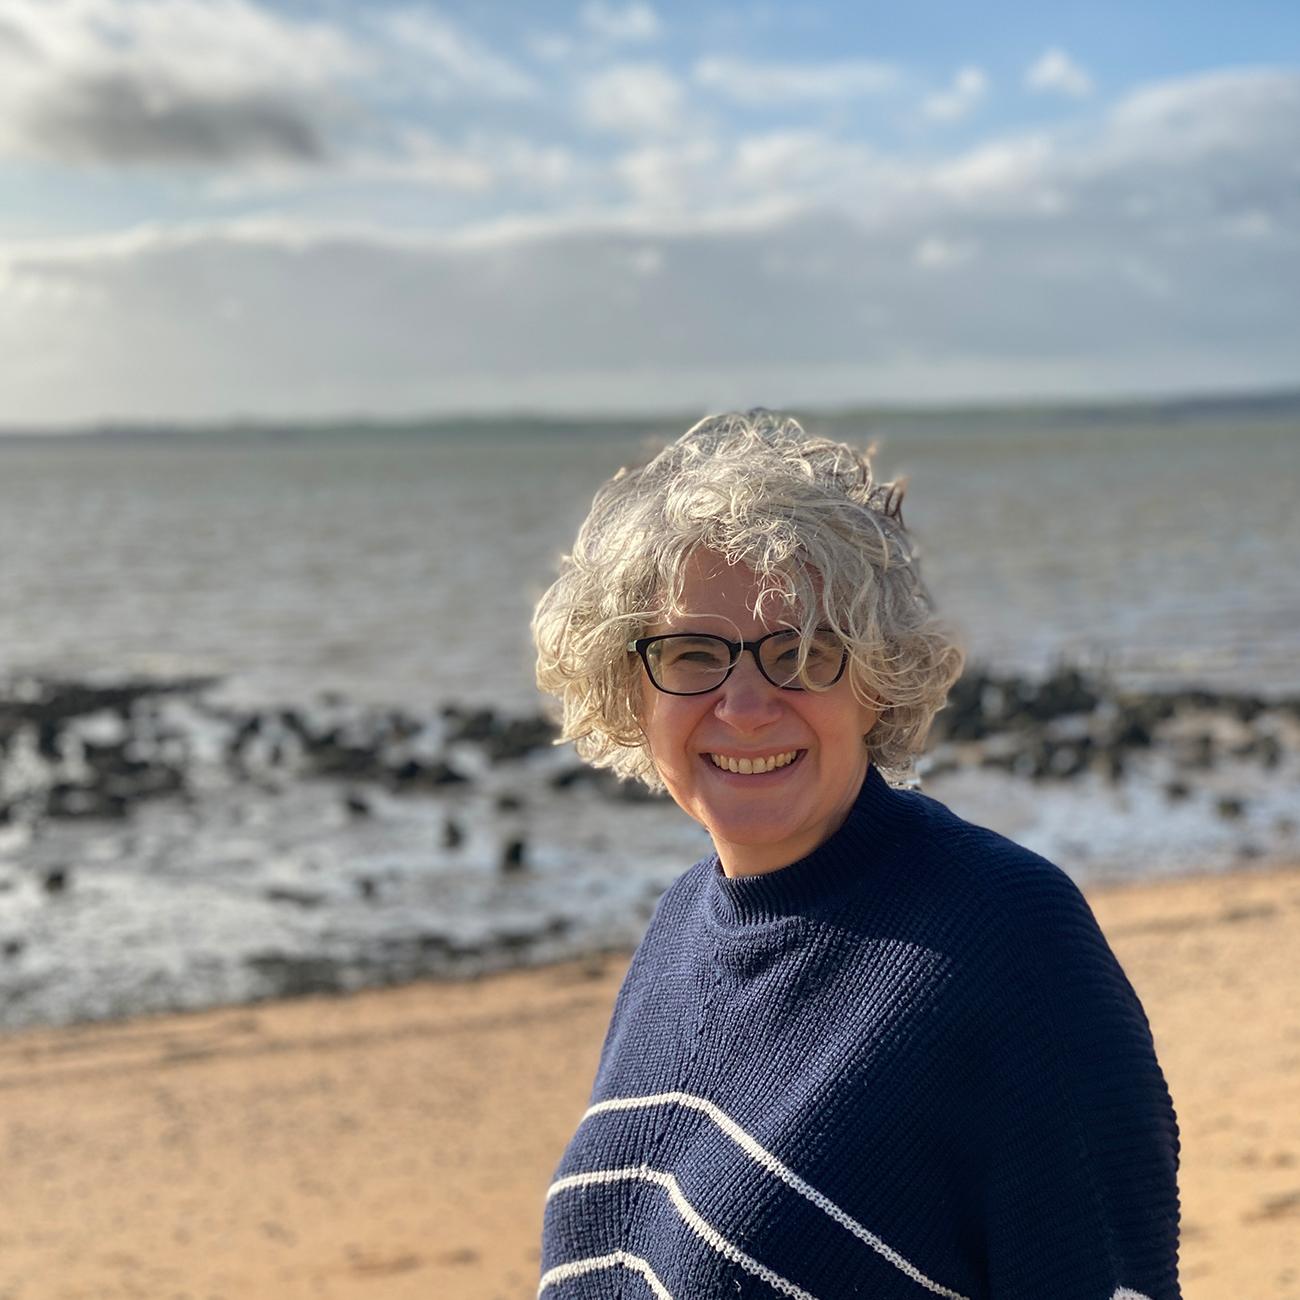 picture of a woman on the beach wearing glasses and a navy and white striped jumper.  She has short, grey hair